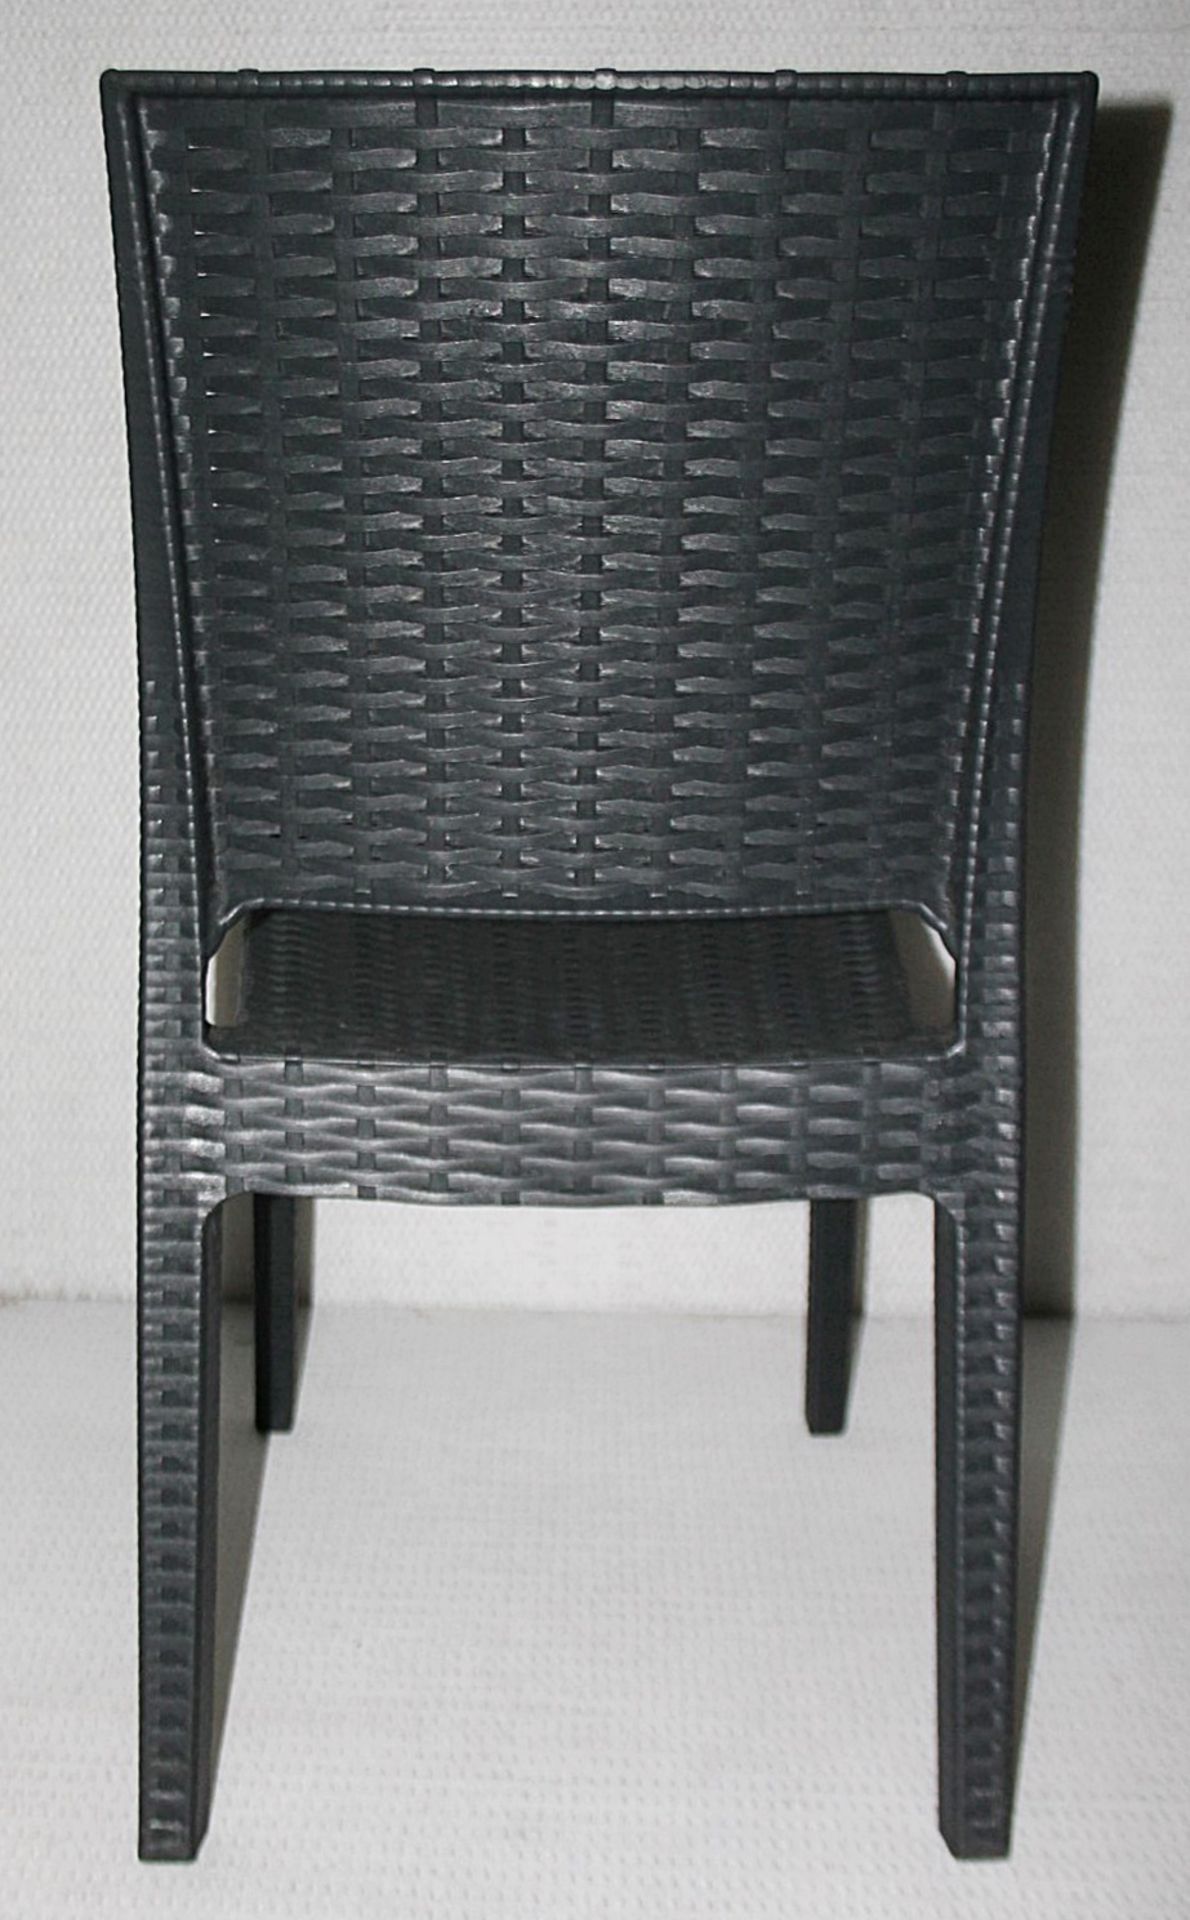 8 x SIESTA EXCLUSIVE 'Florida' Commercial Stackable Rattan-style Chairs In Dark Grey -CL987 - - Image 5 of 13